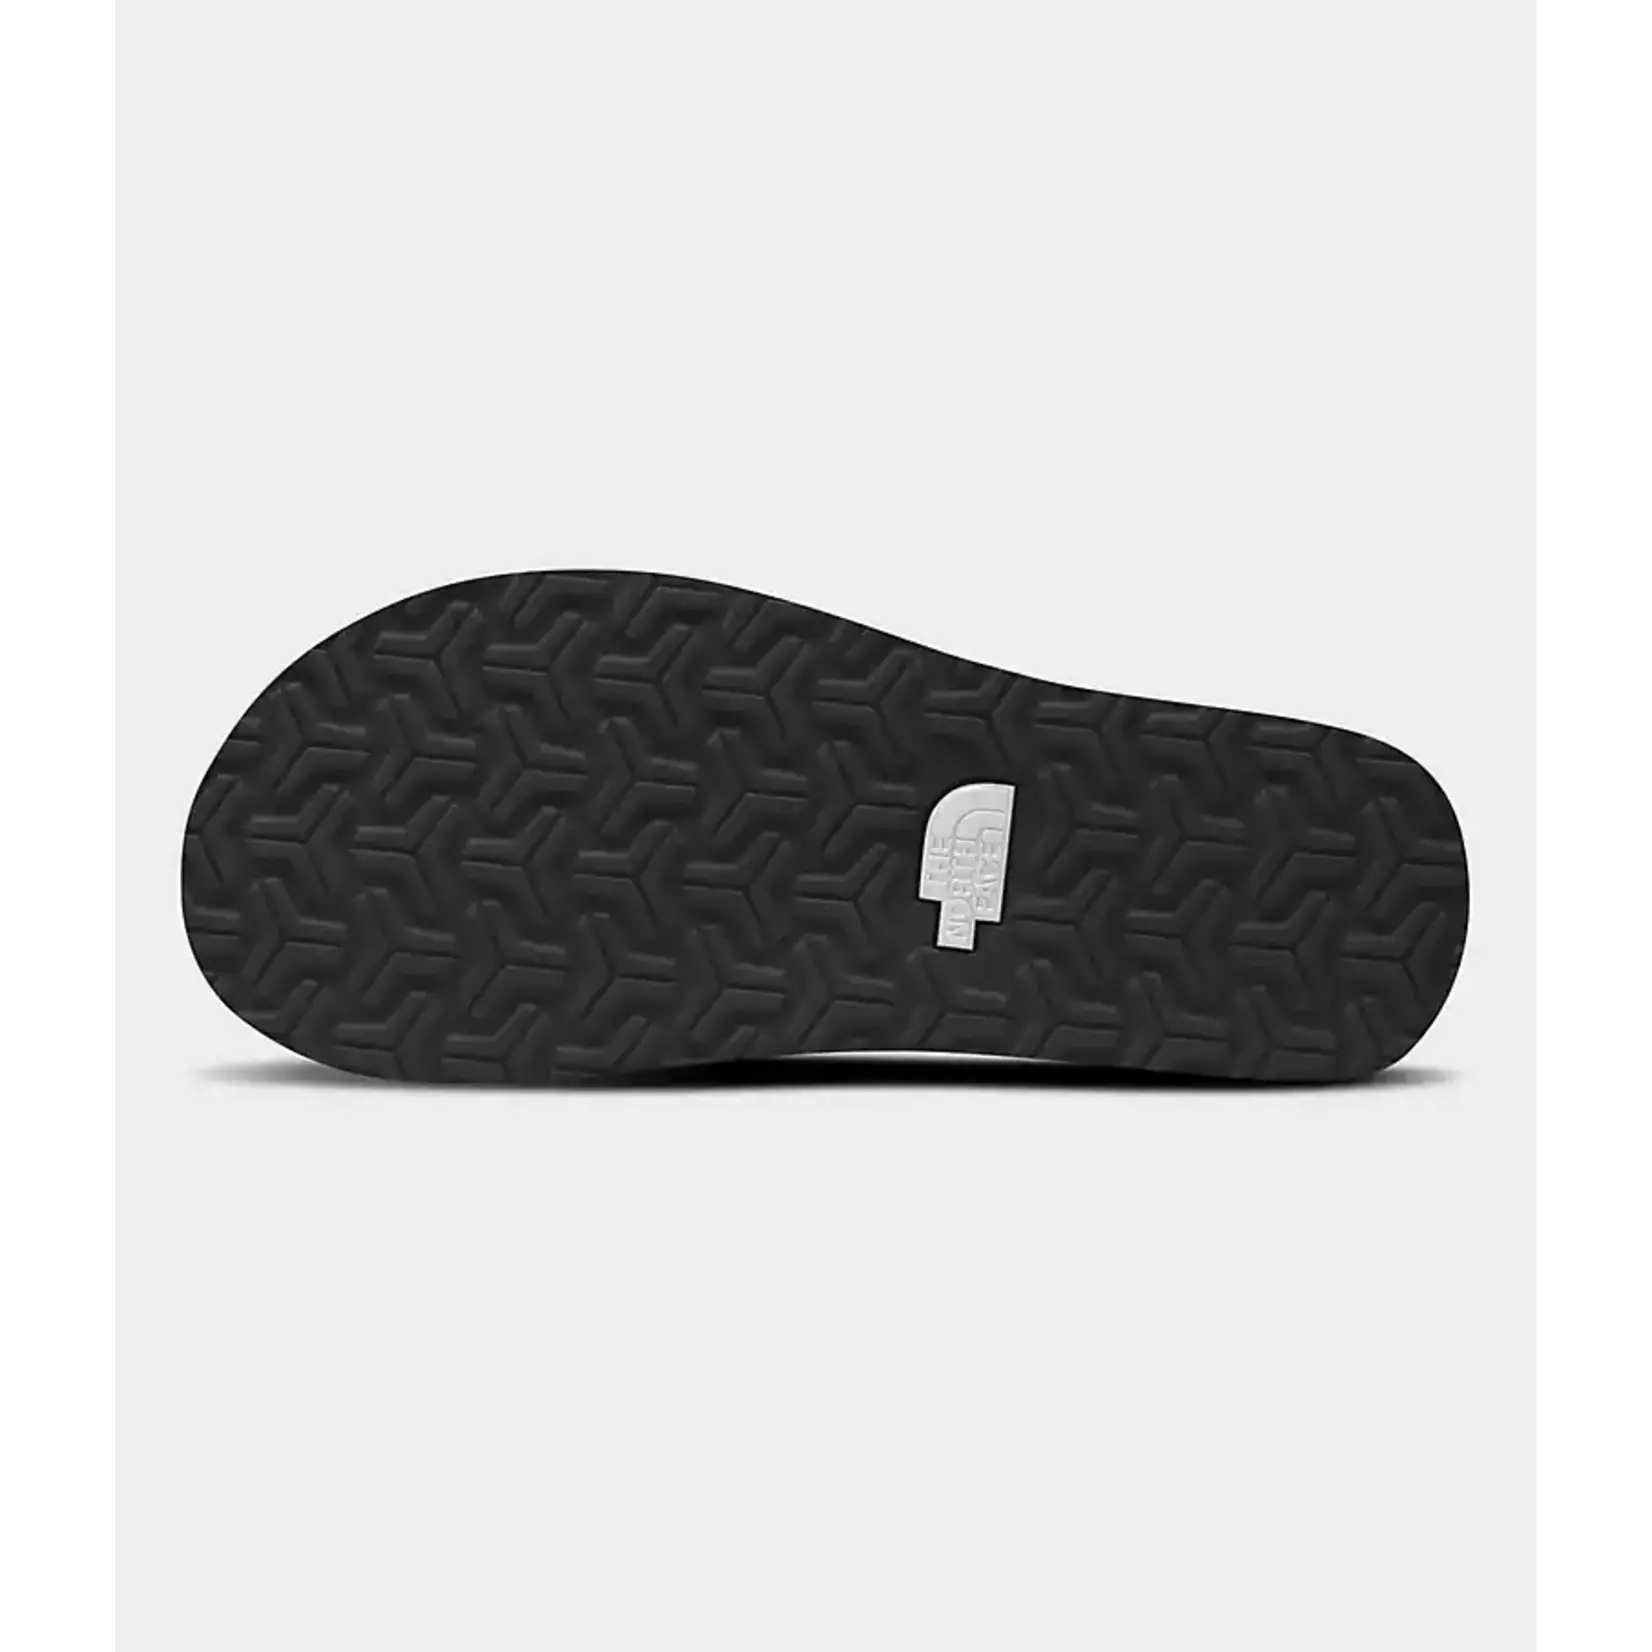 North Face NORTH FACE M Base Camp Flip flop II NF0A47AAKY4